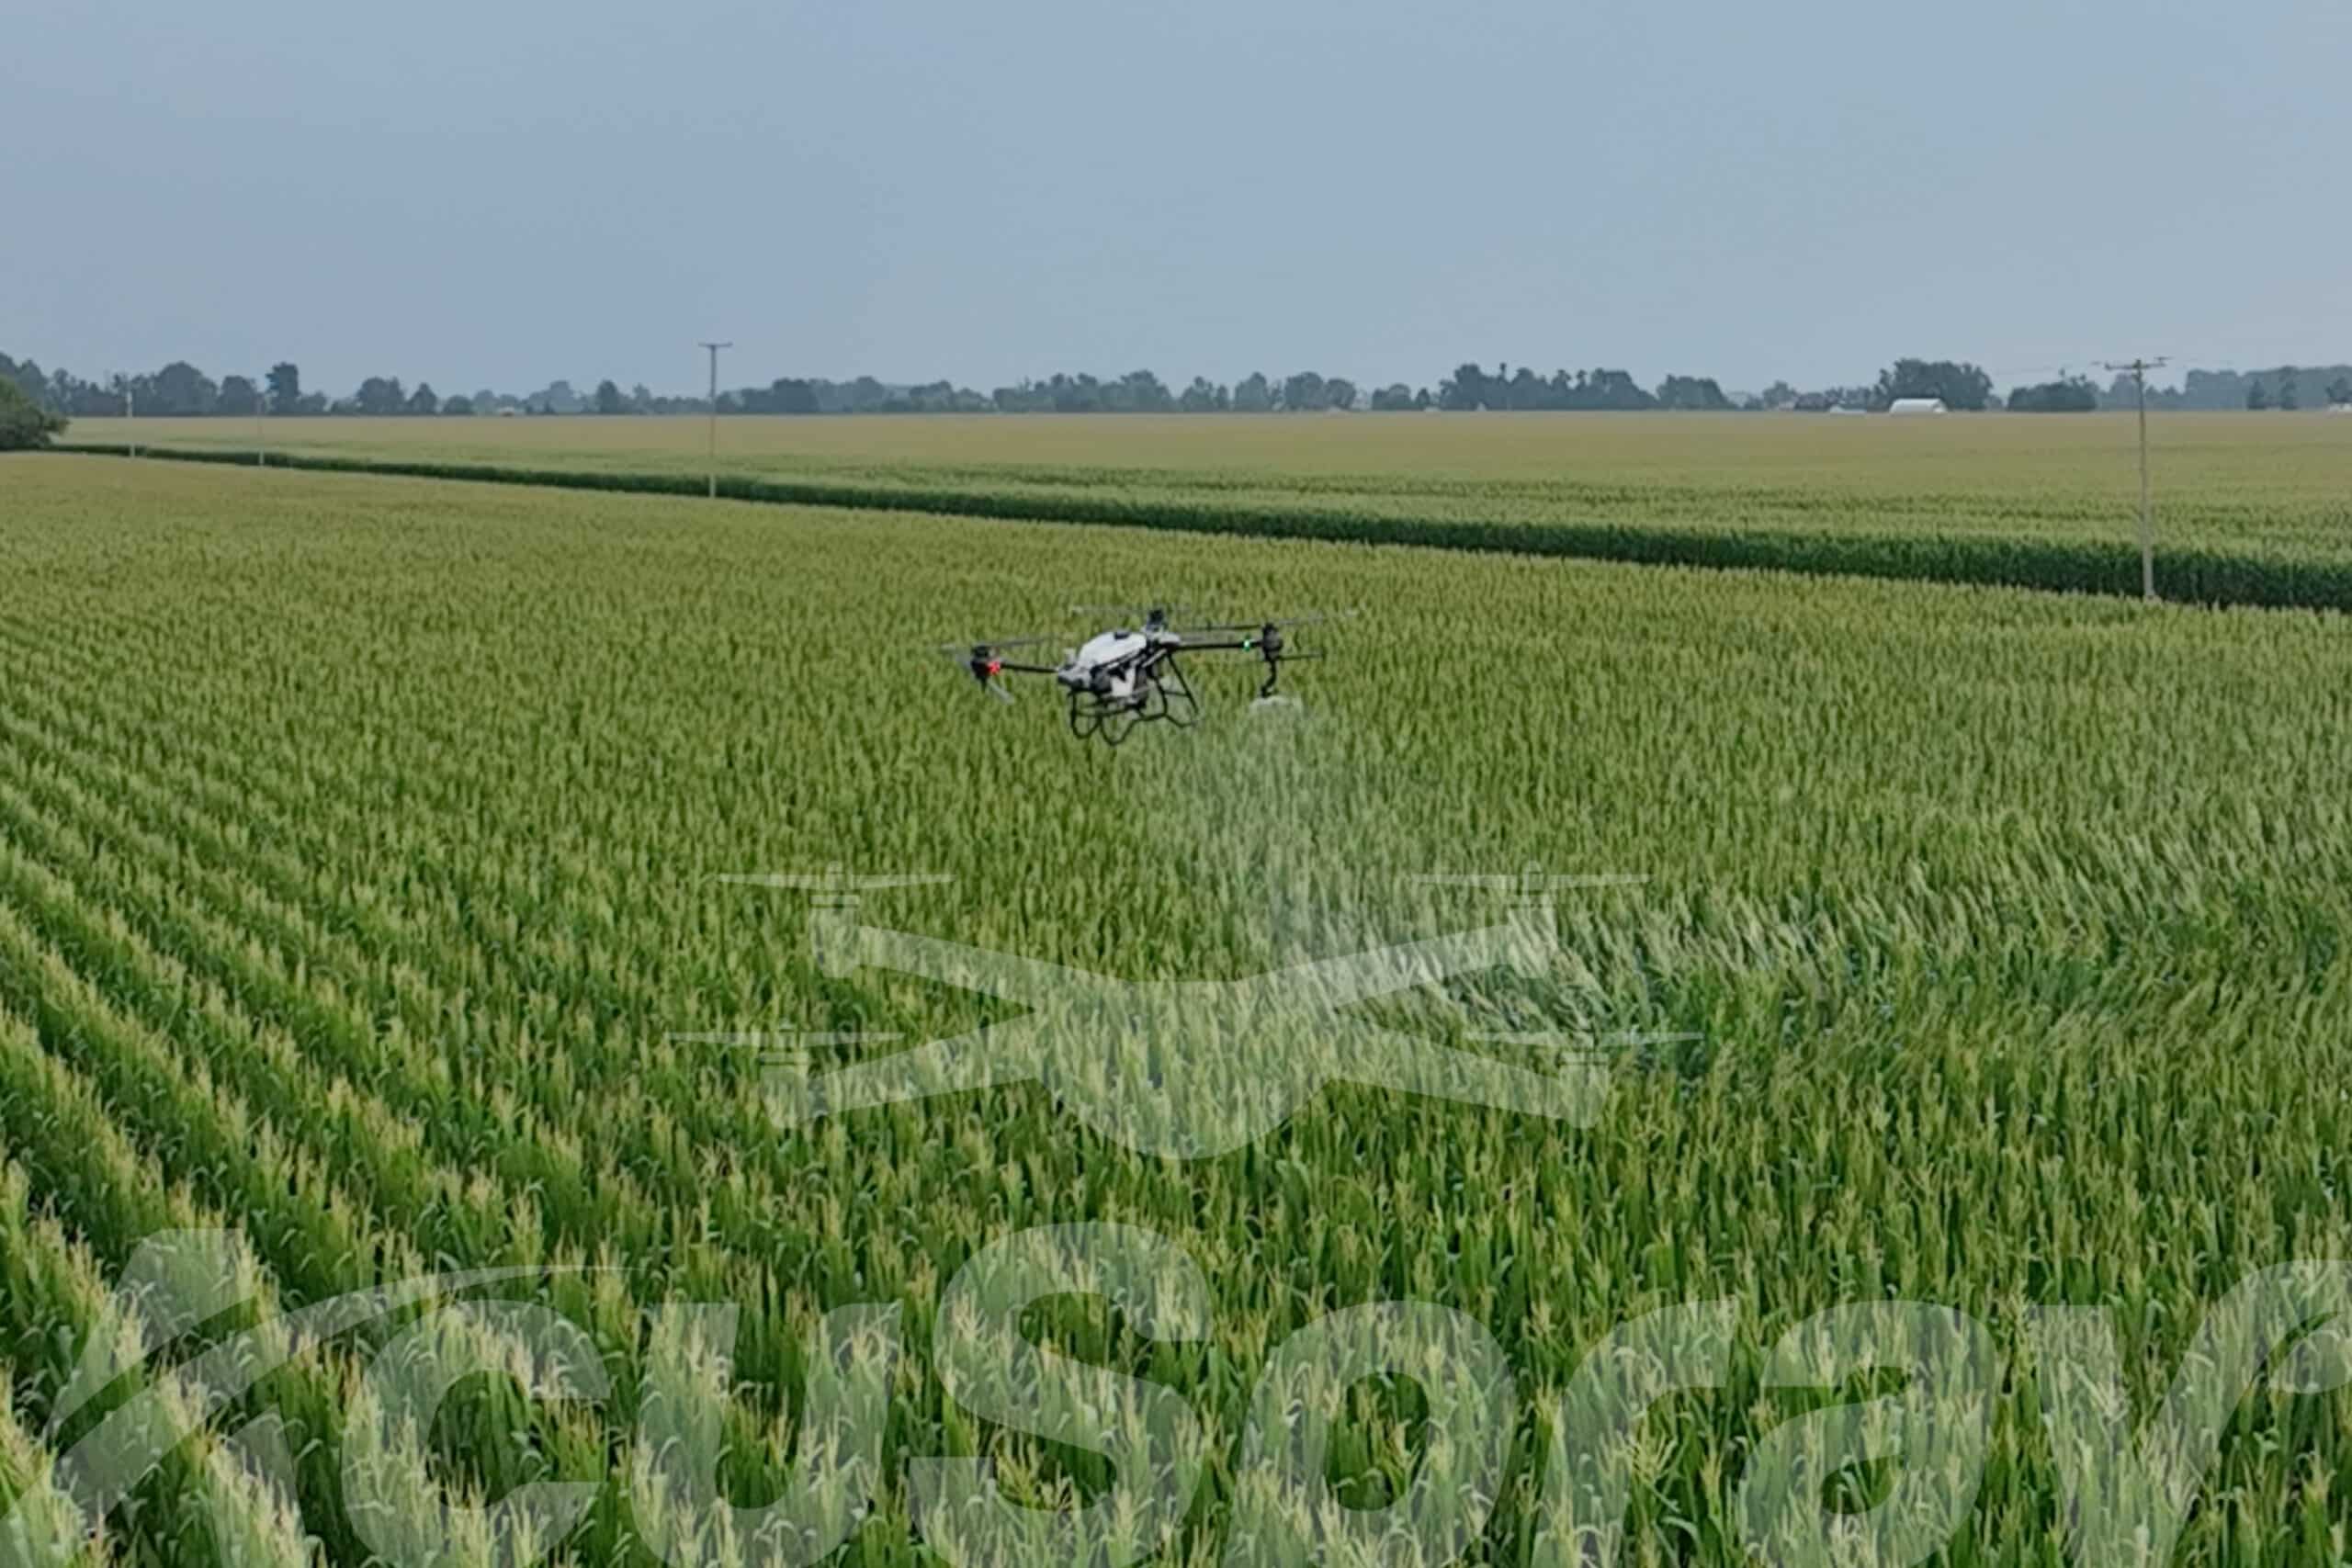 Spray drone applying treatment to a cornfield, similar to technologies showcased at AgroExpo St. Johns.